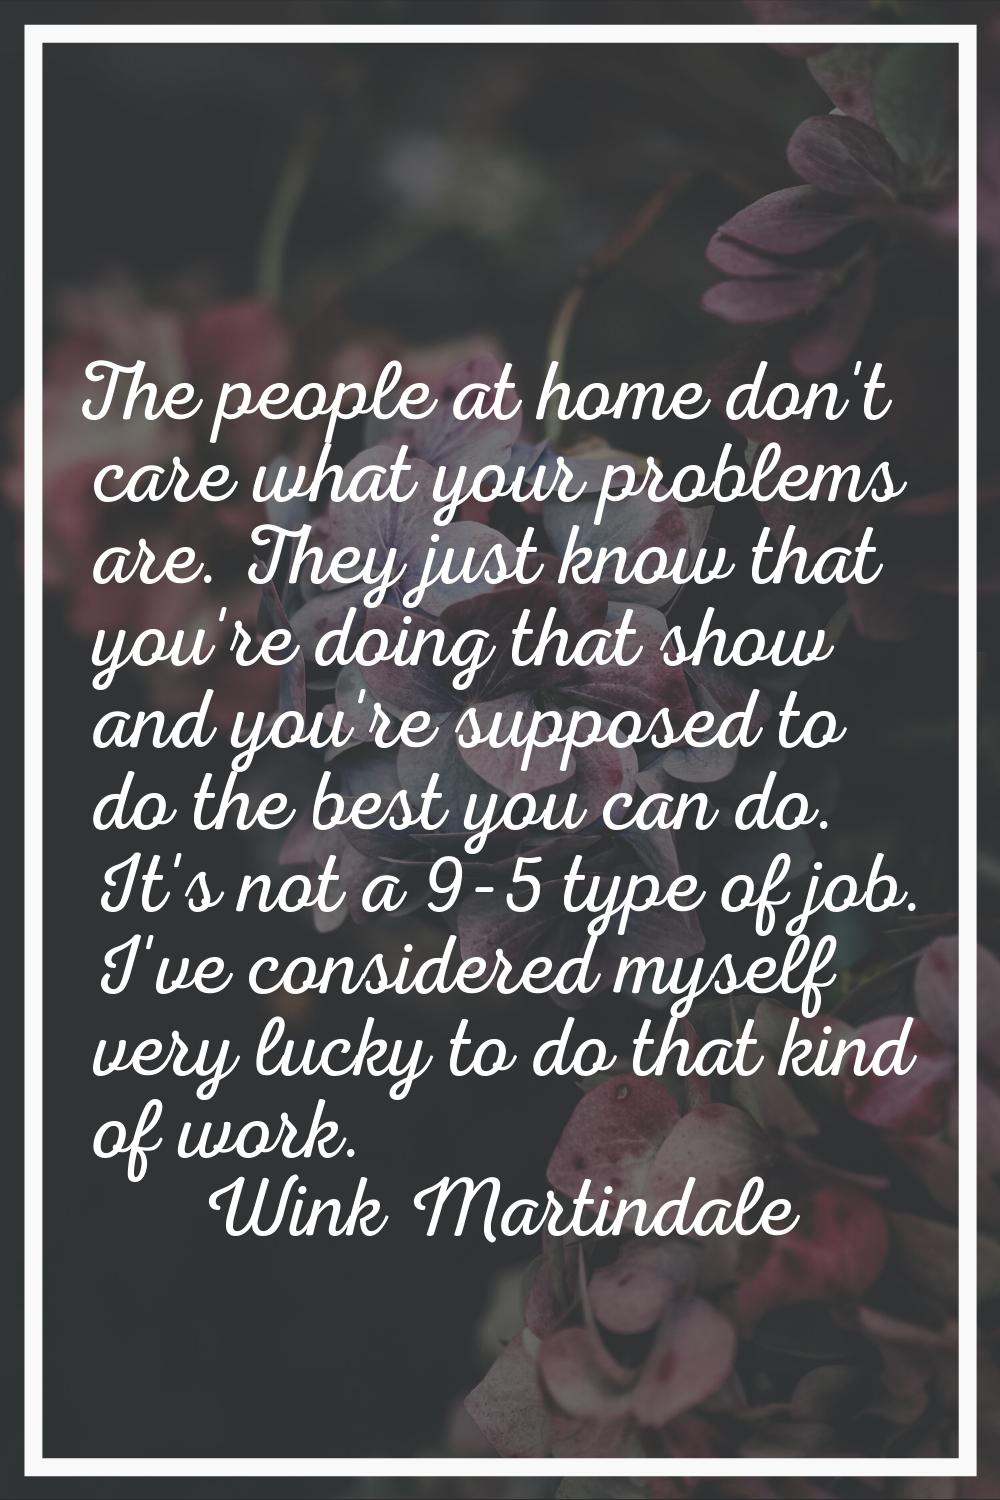 The people at home don't care what your problems are. They just know that you're doing that show an